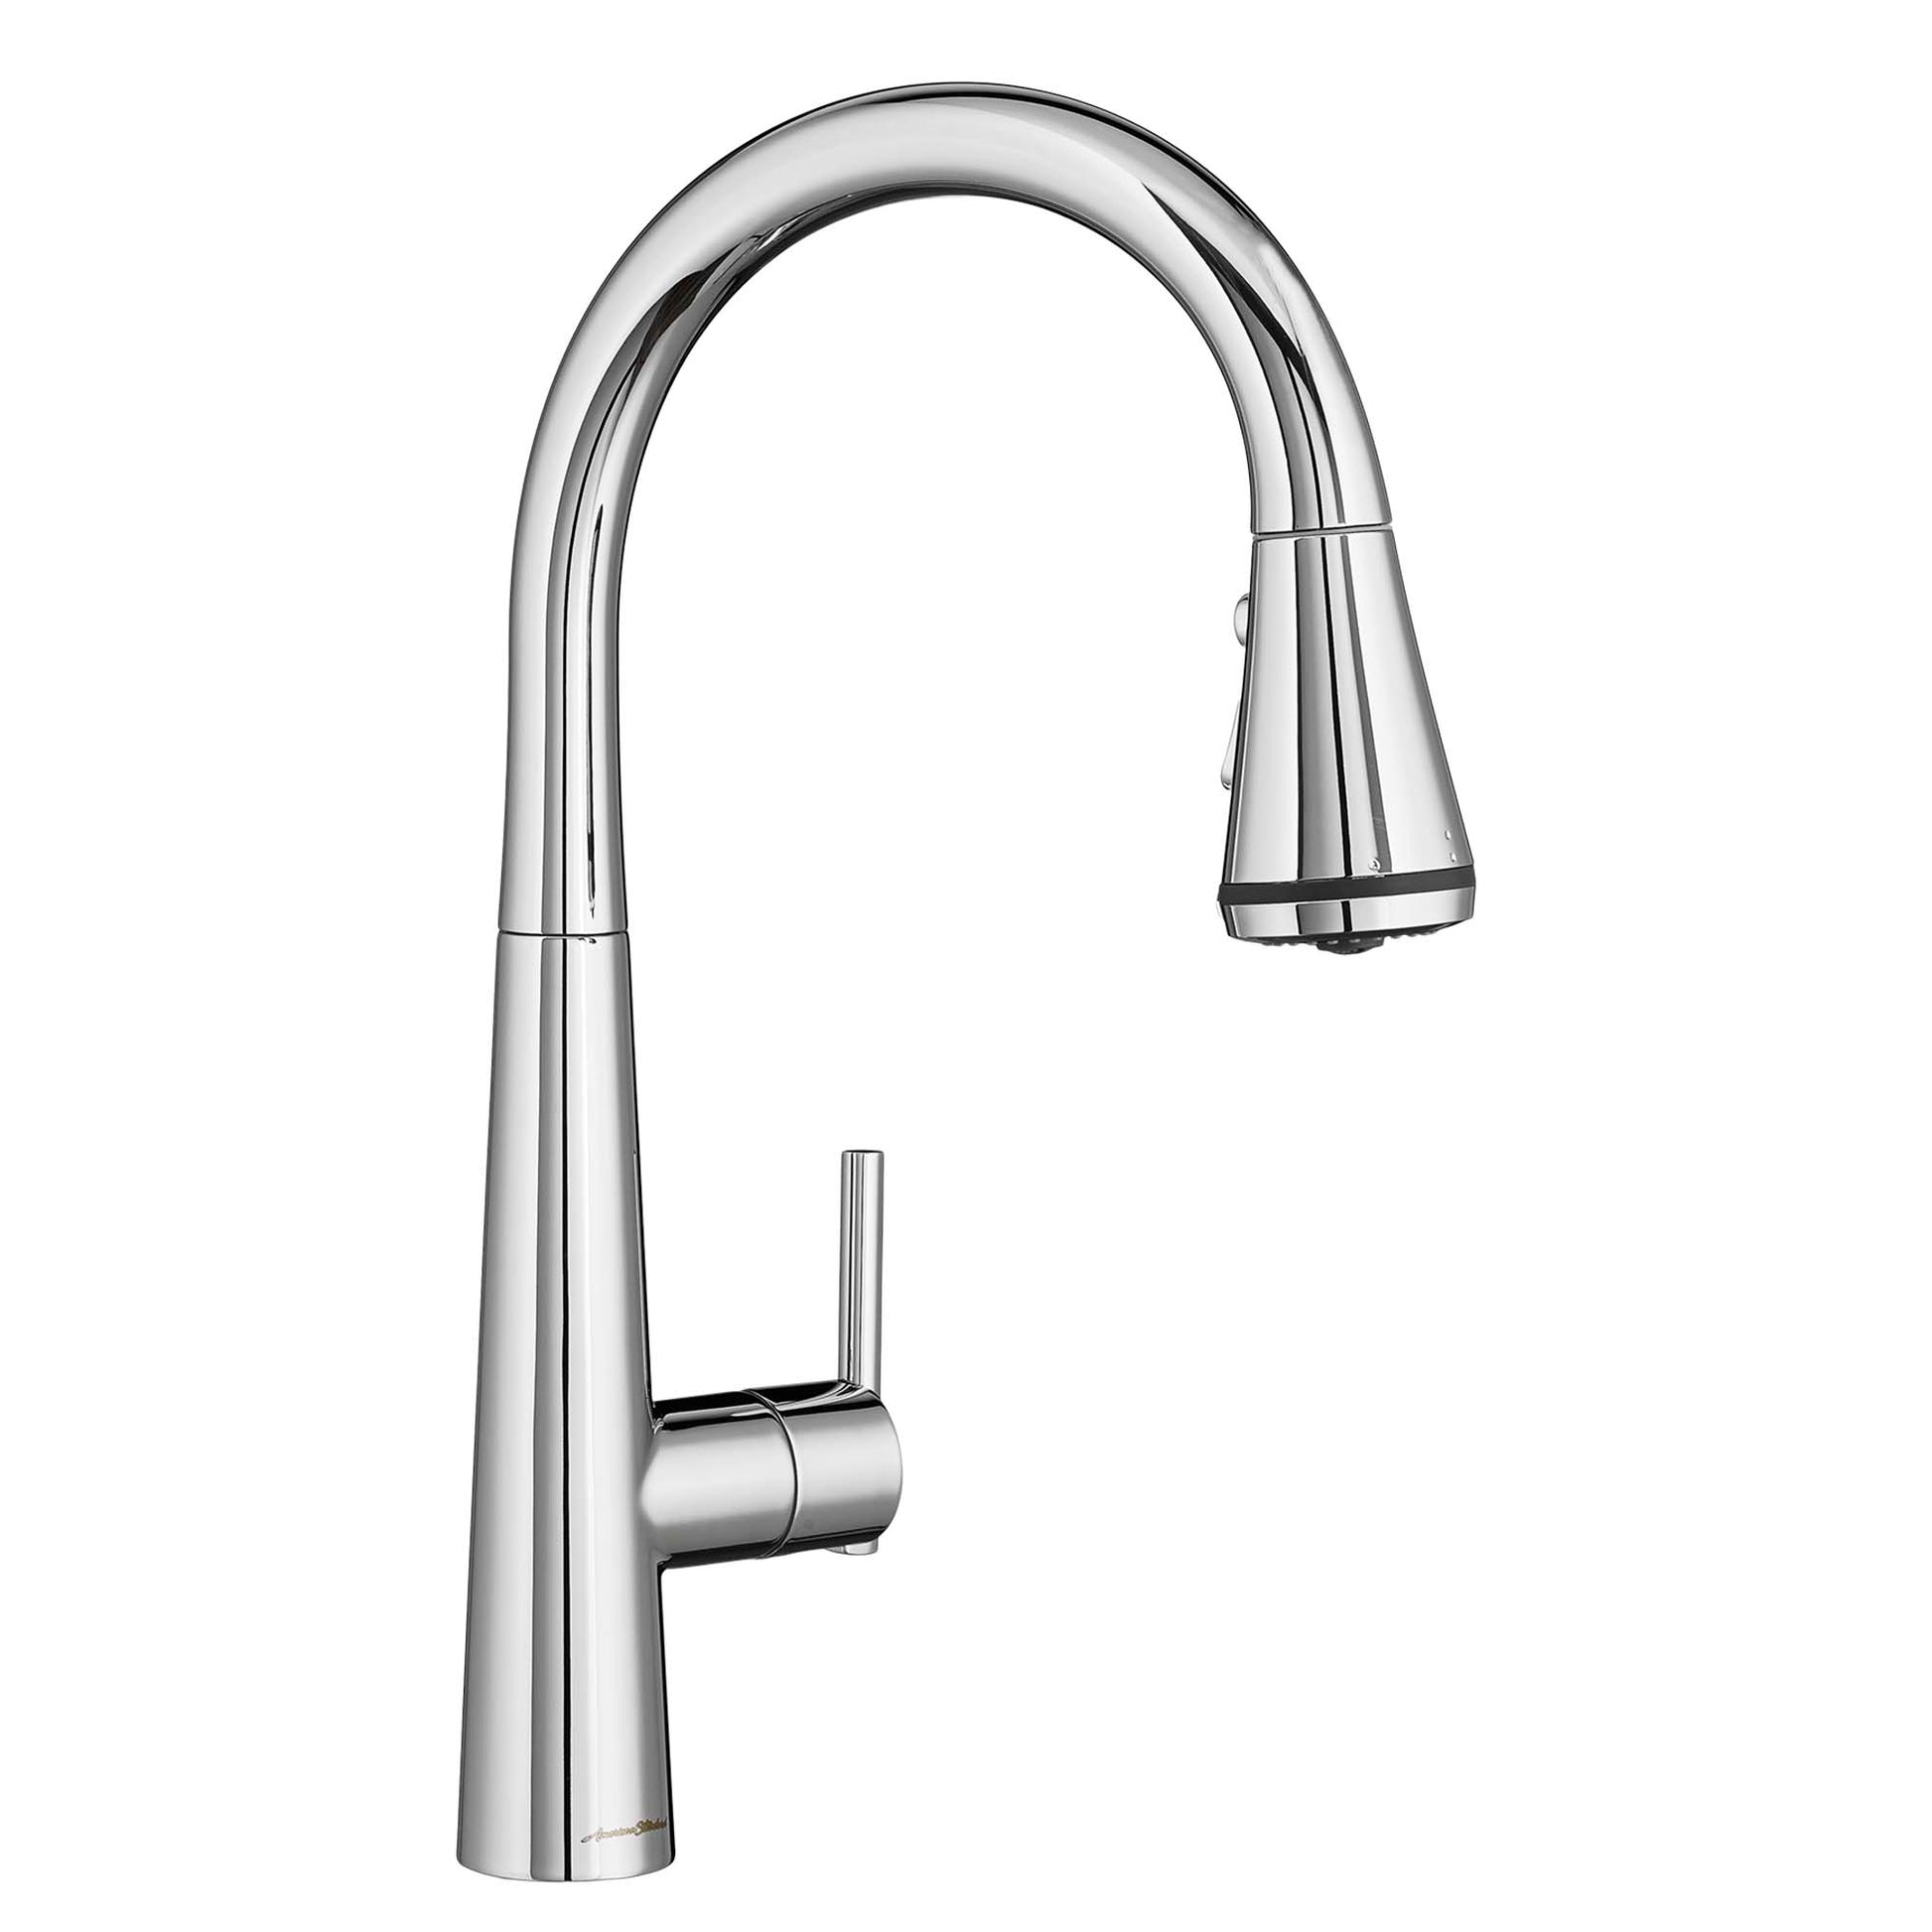 AMERICAN-STANDARD 4932300.002, Edgewater Single-Handle Pull-Down Multi Spray Kitchen Faucet 1.8 gpm/6.8 L/min in Chrome